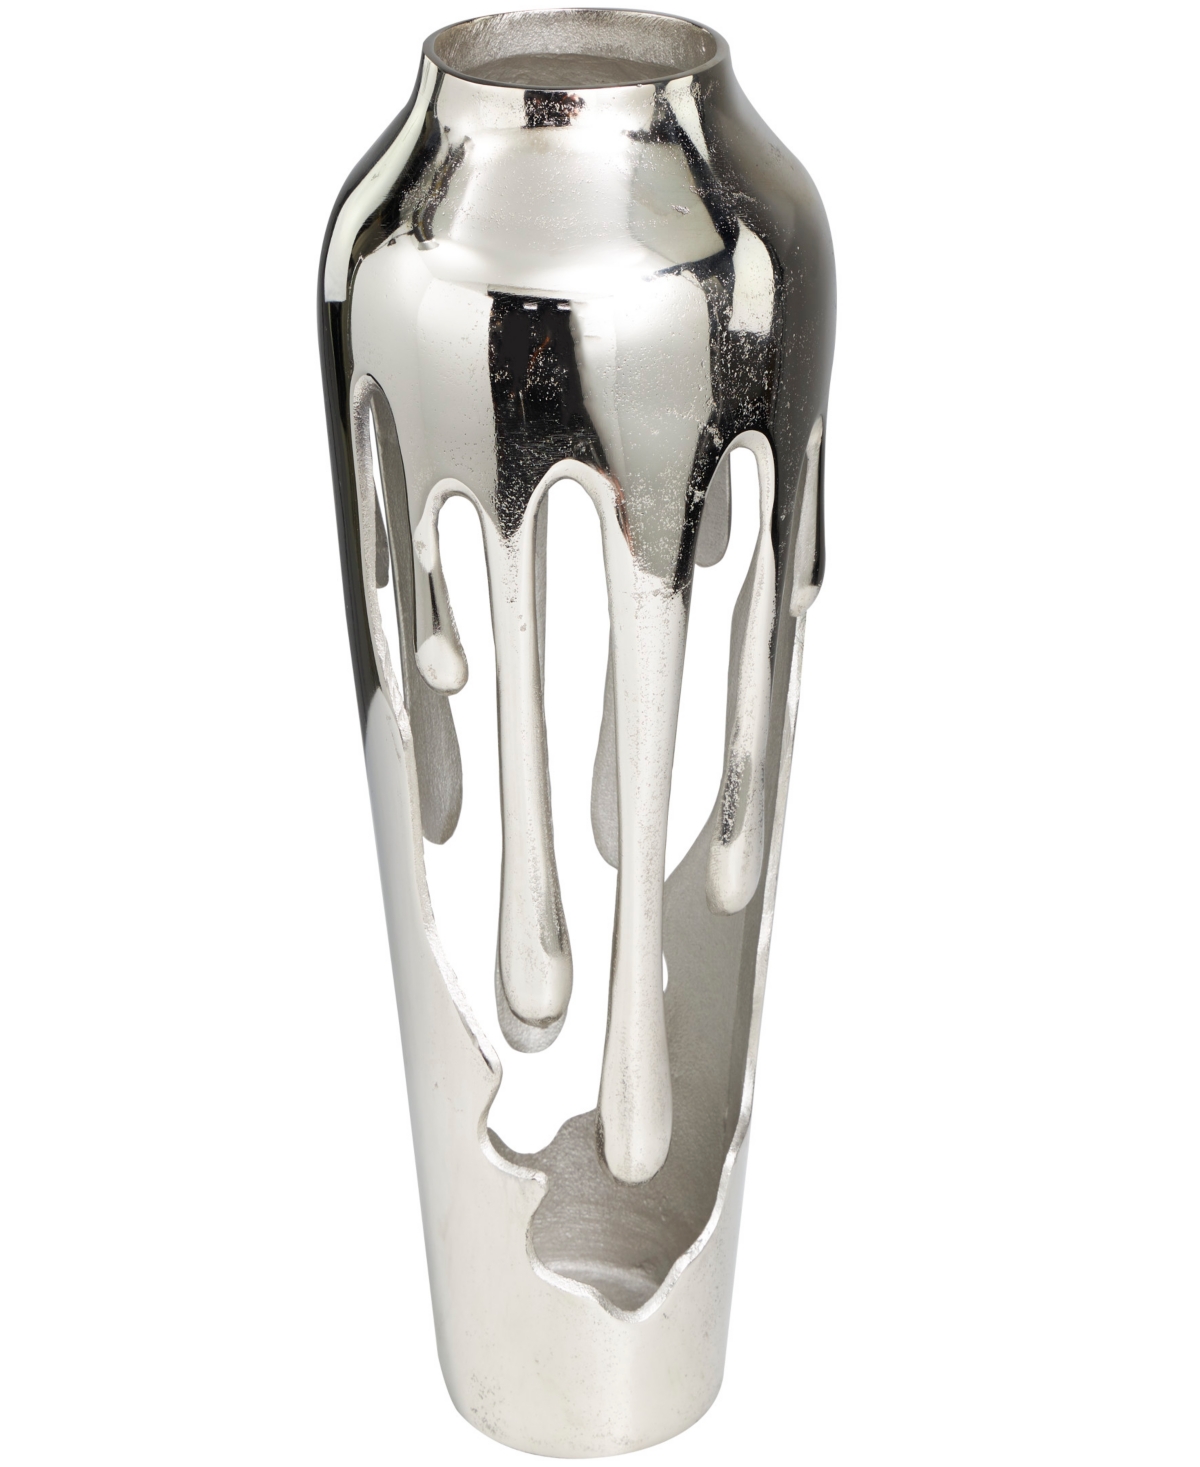 Rosemary Lane Aluminum Drip Vase With Melting Designed Body, 8" X 8" X 19" In Silver